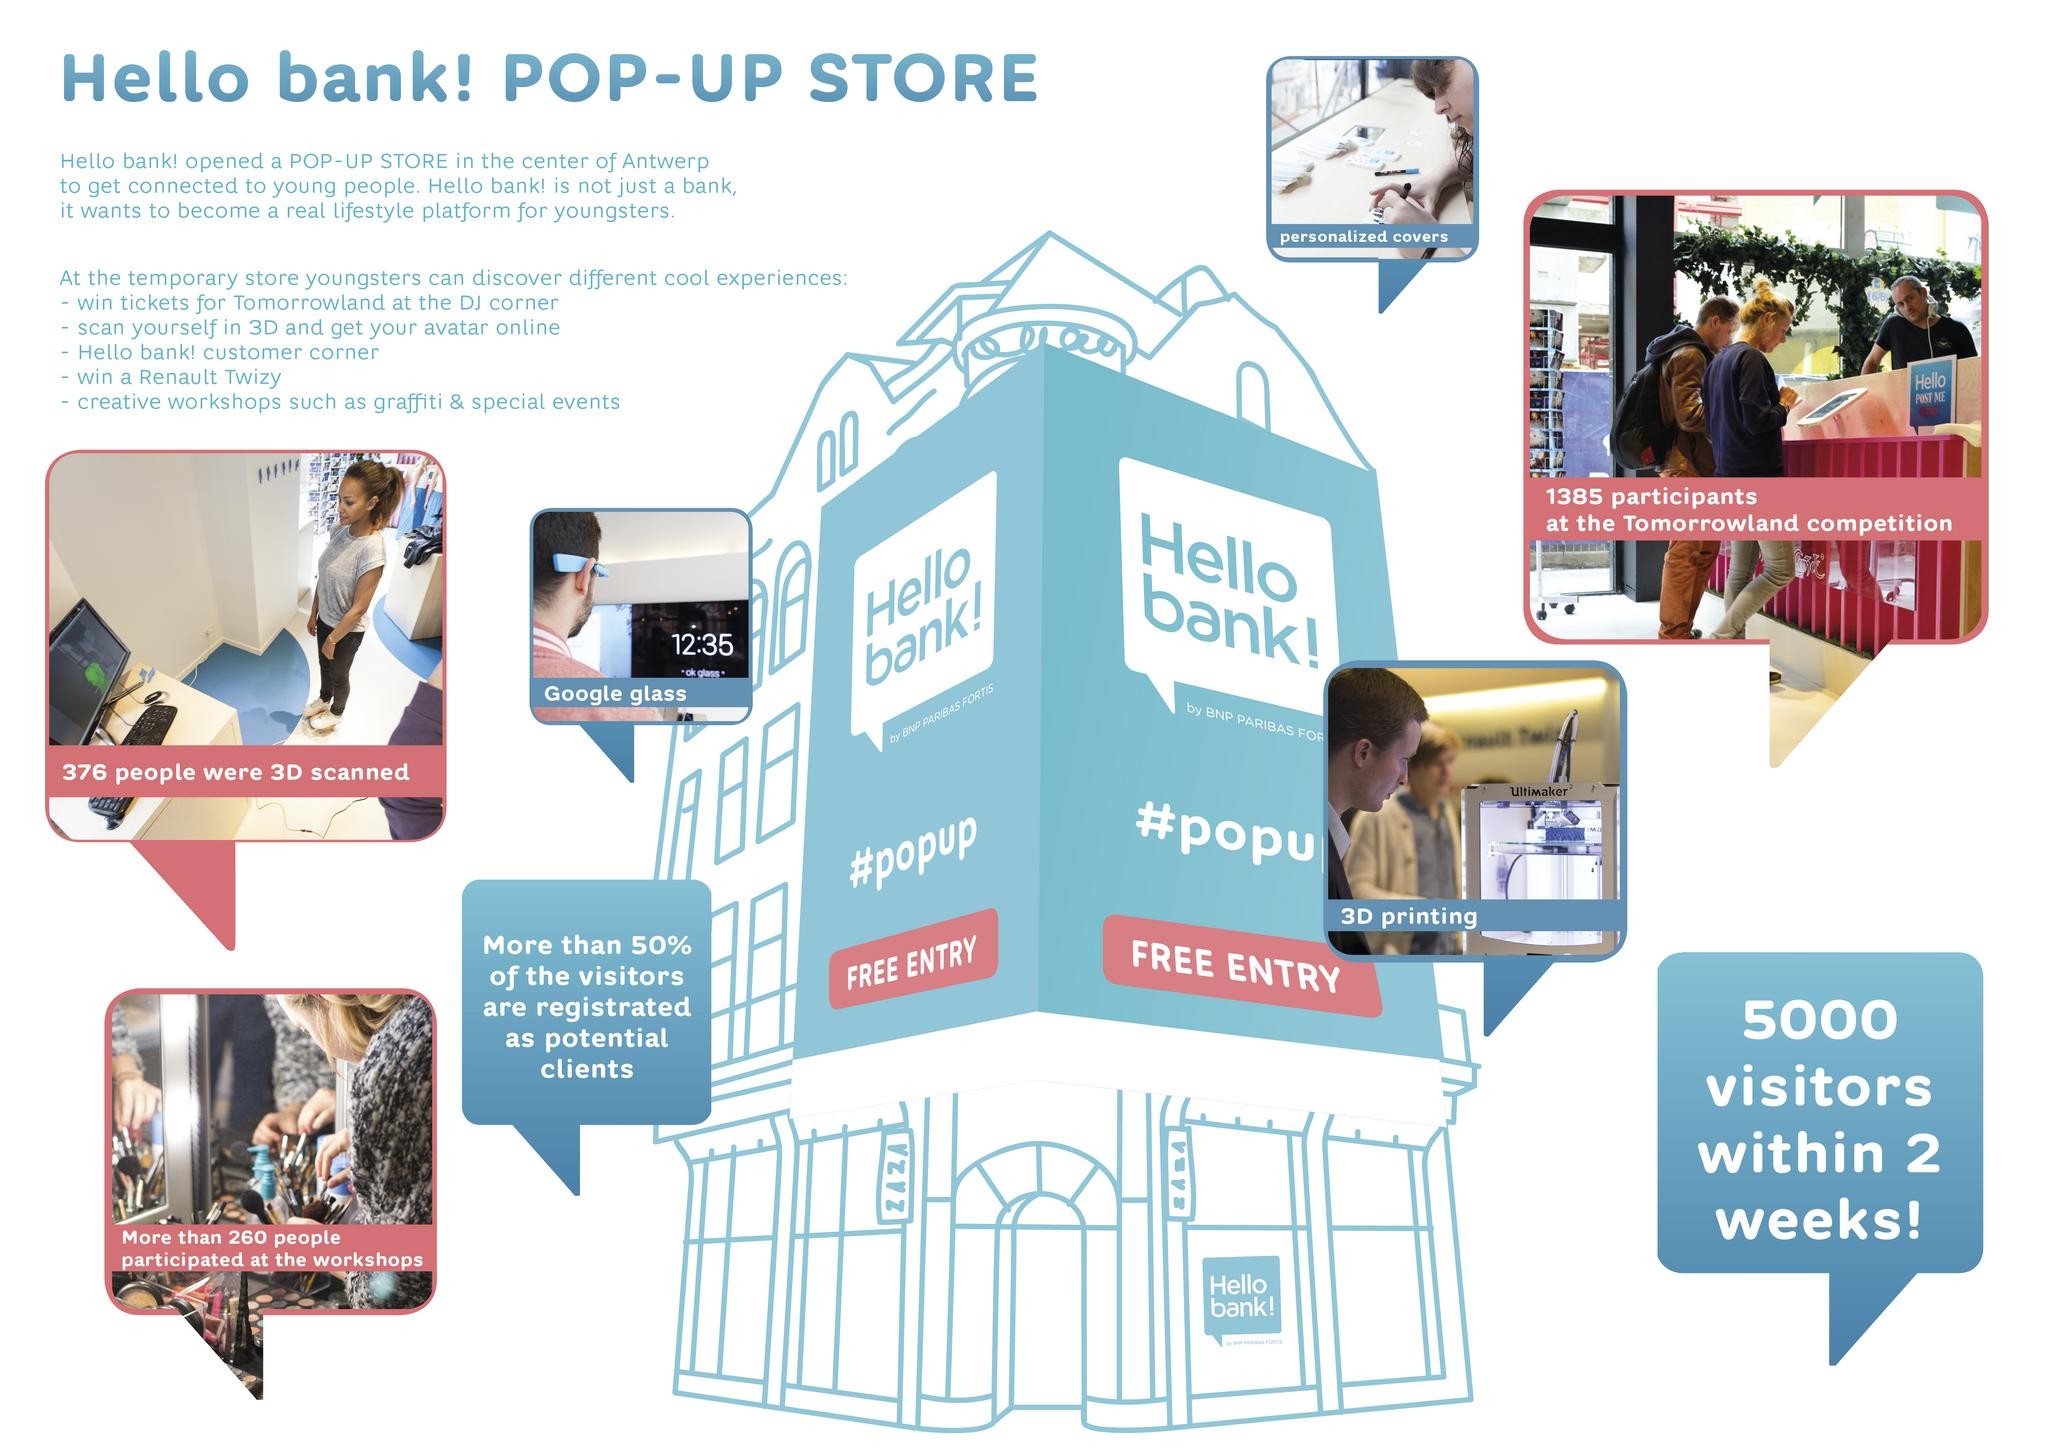 HELLO BANK! POP-UP EXPERIENCE